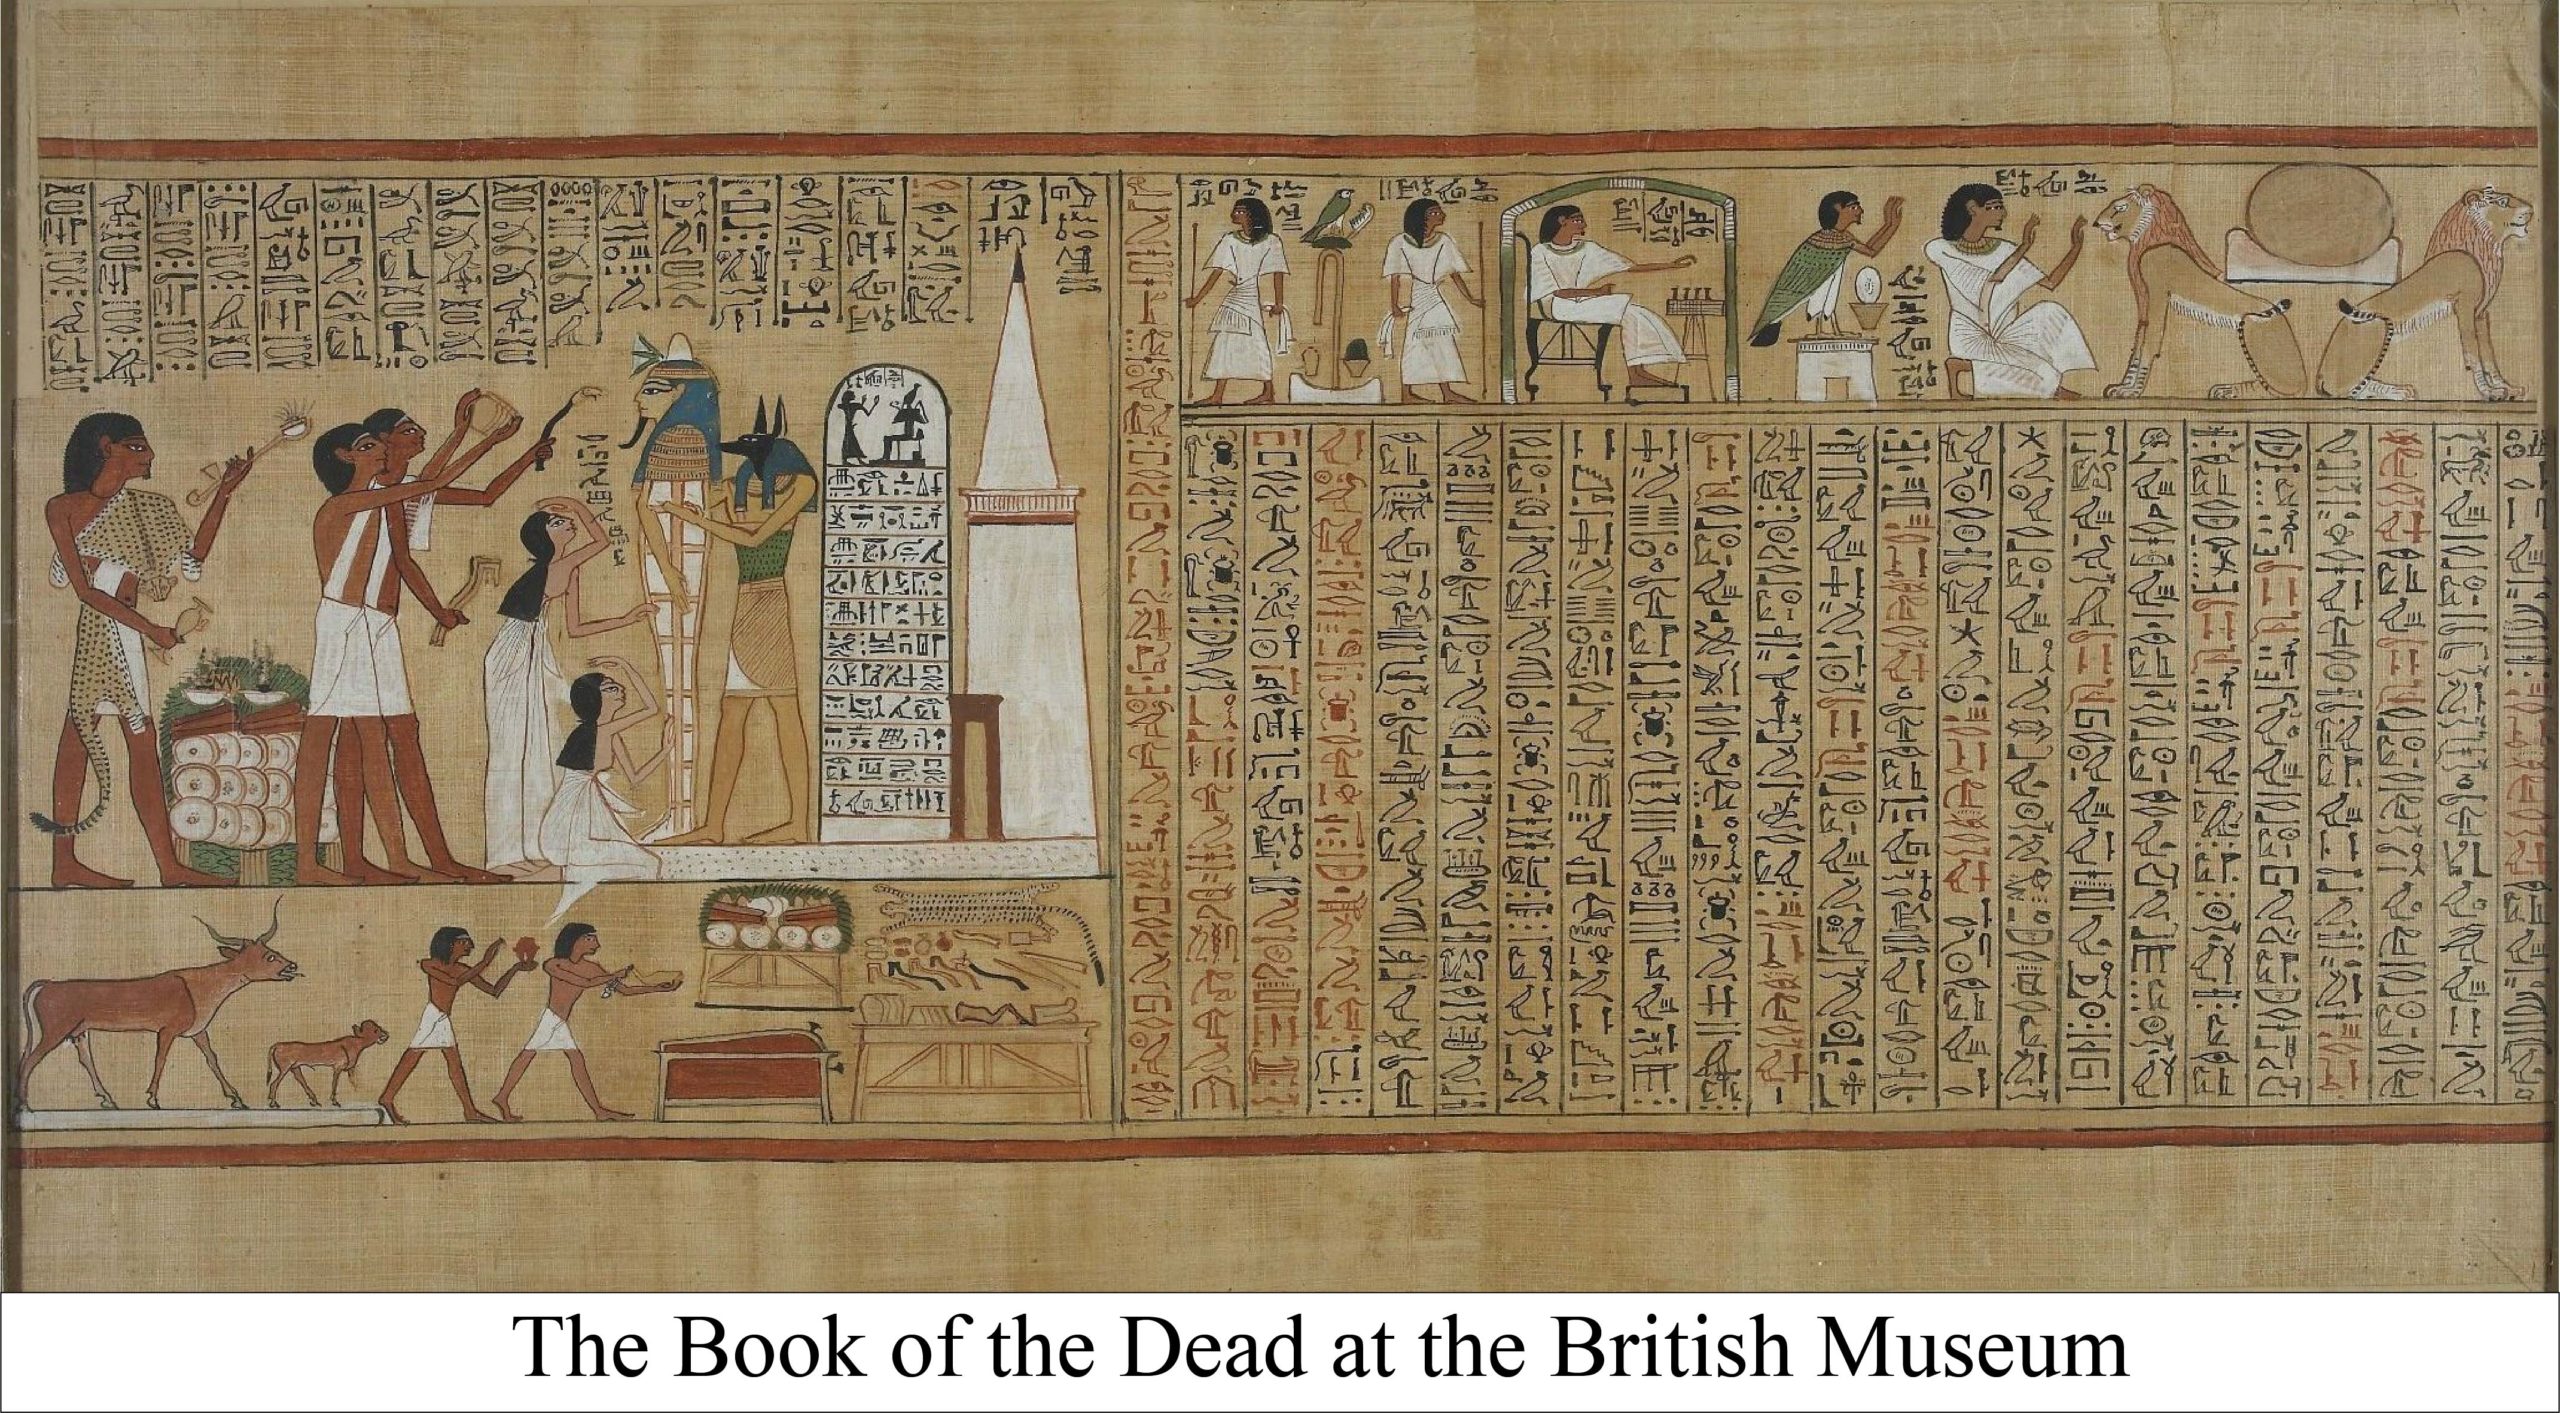 The Book of the Dead is an ancient Egyptian funerary text